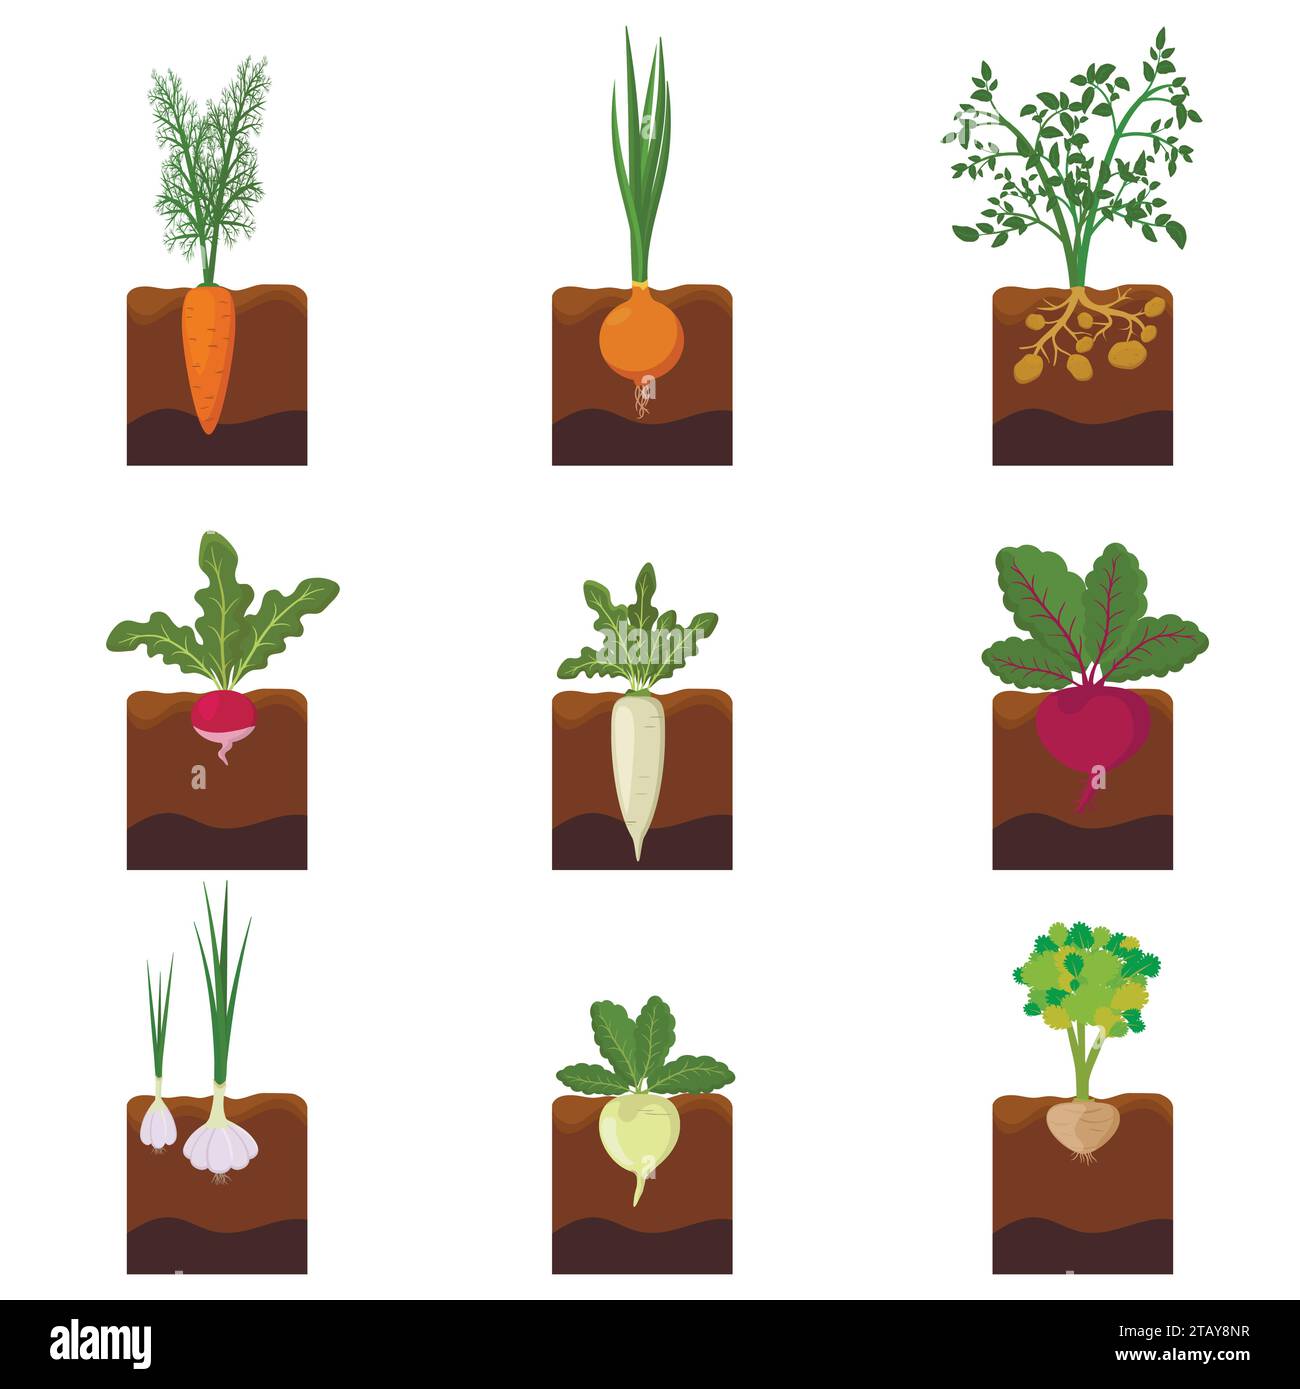 Set of different vegetables plant growing underground - carrot, onion, potatoes, radish, daikon, beet, garlic, celery. Root crop vegetable planted Stock Vector